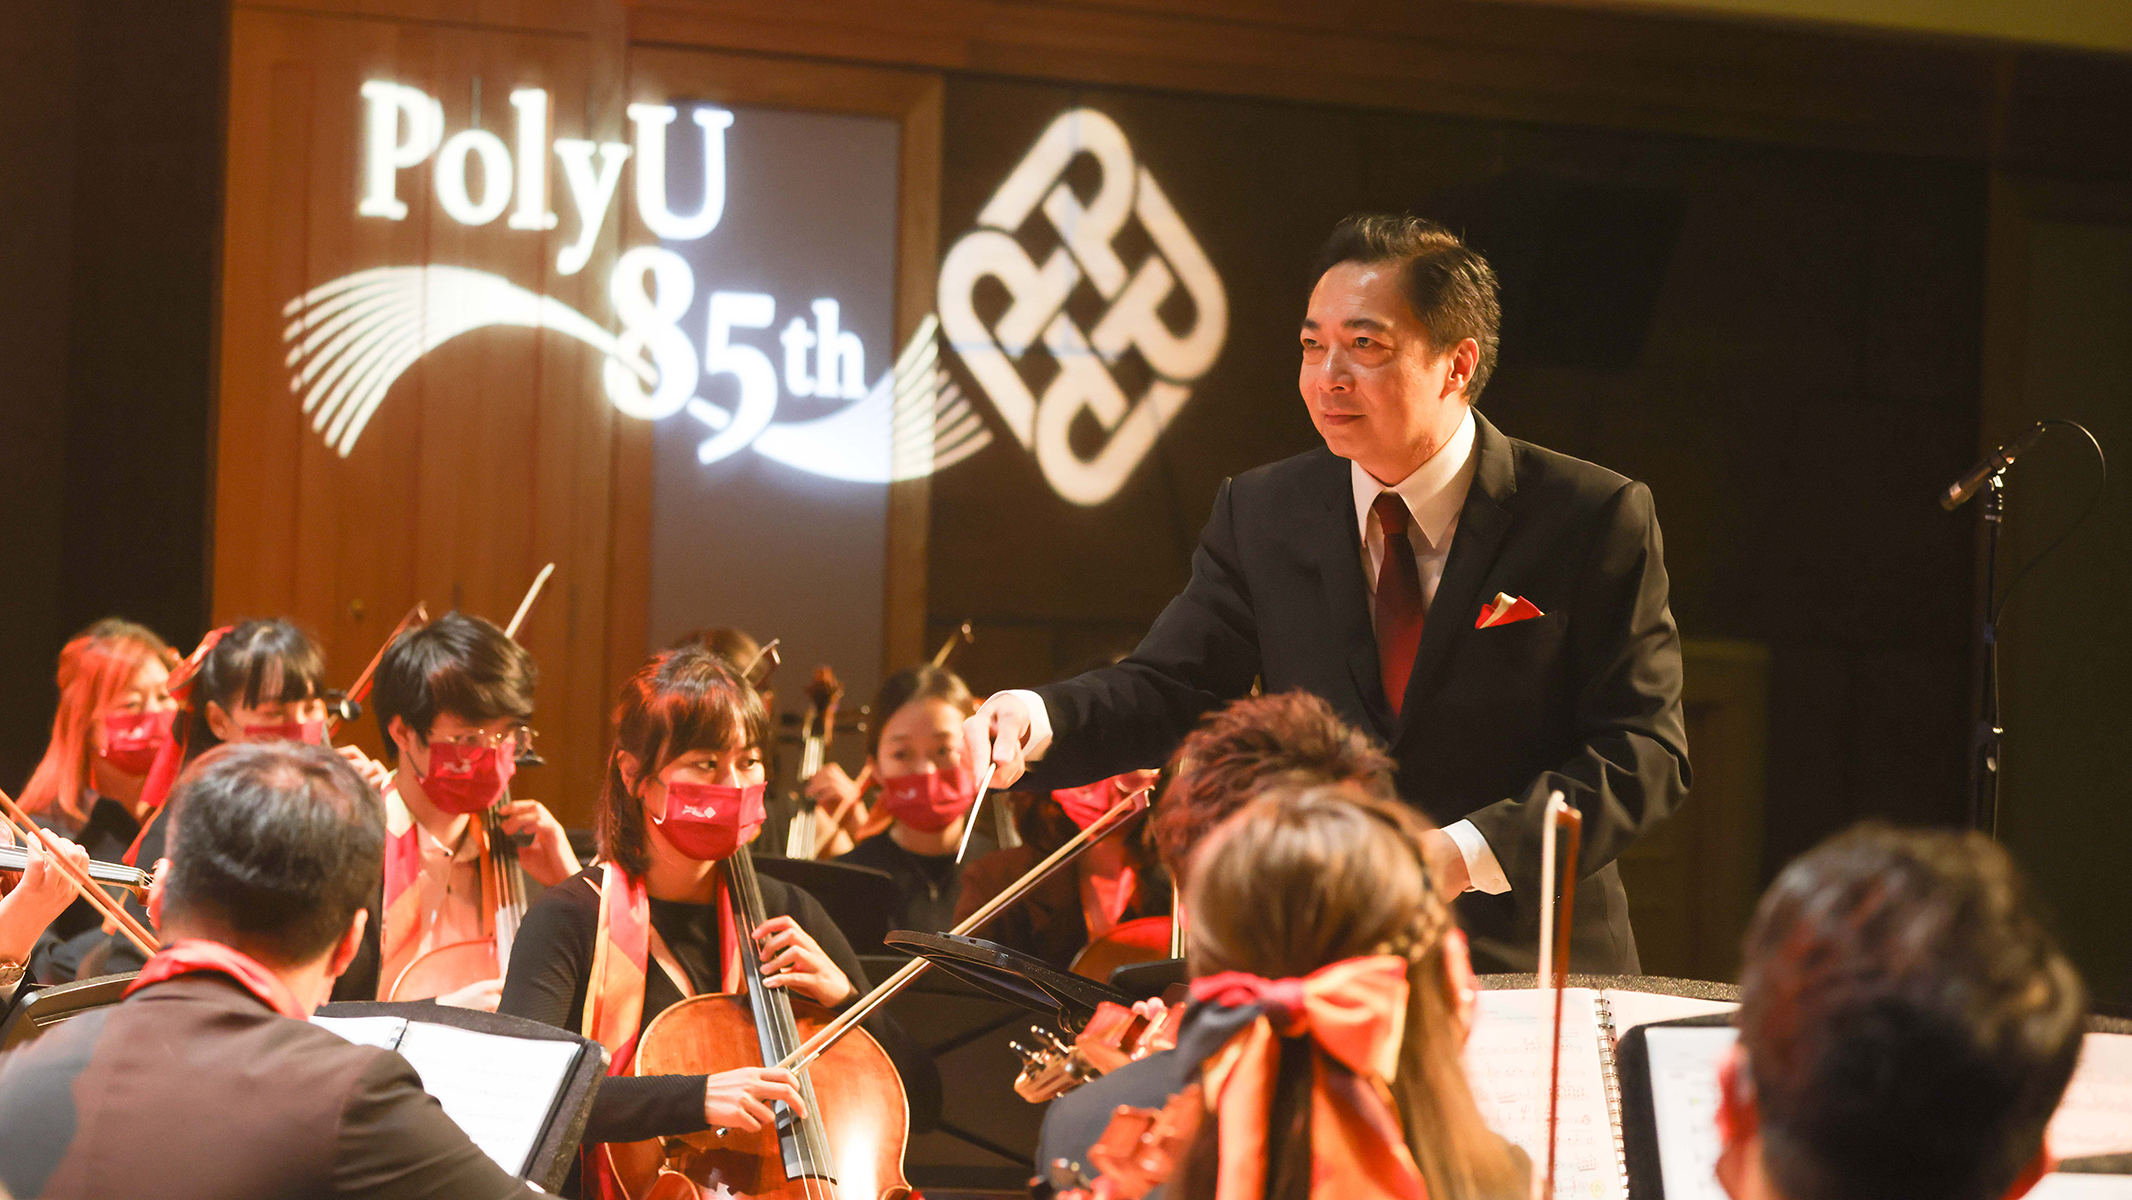 Music Director of the Grand Concert, Mr Leung Kin-fung conducting the PolyU Orchestra